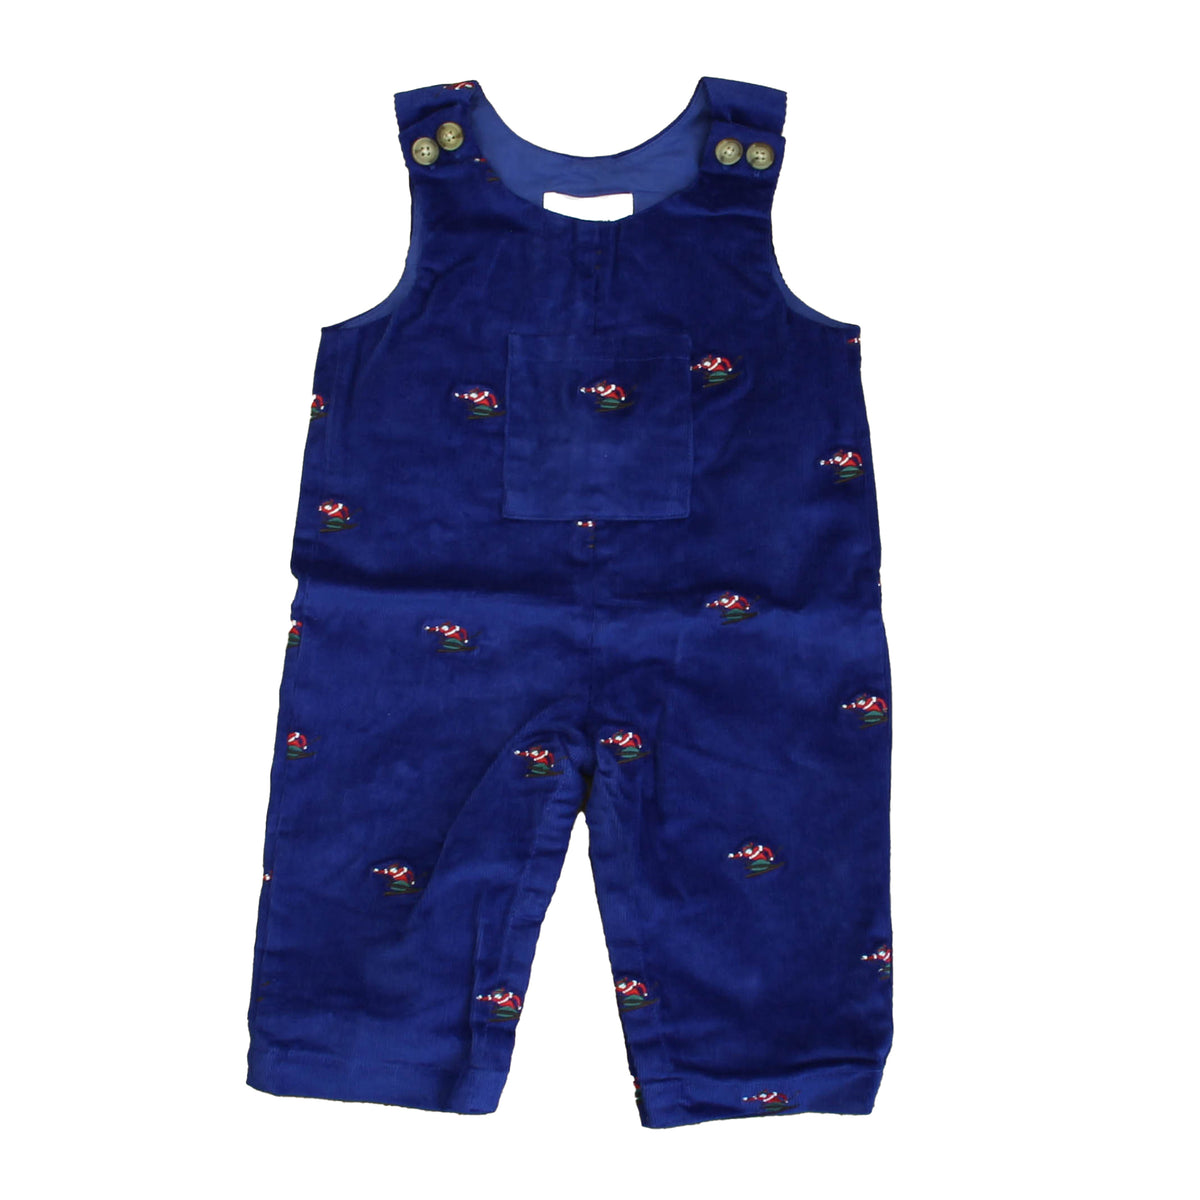 New with Tags: Navy with Skiers Pants size: 6-9 Months -- FINAL SALE